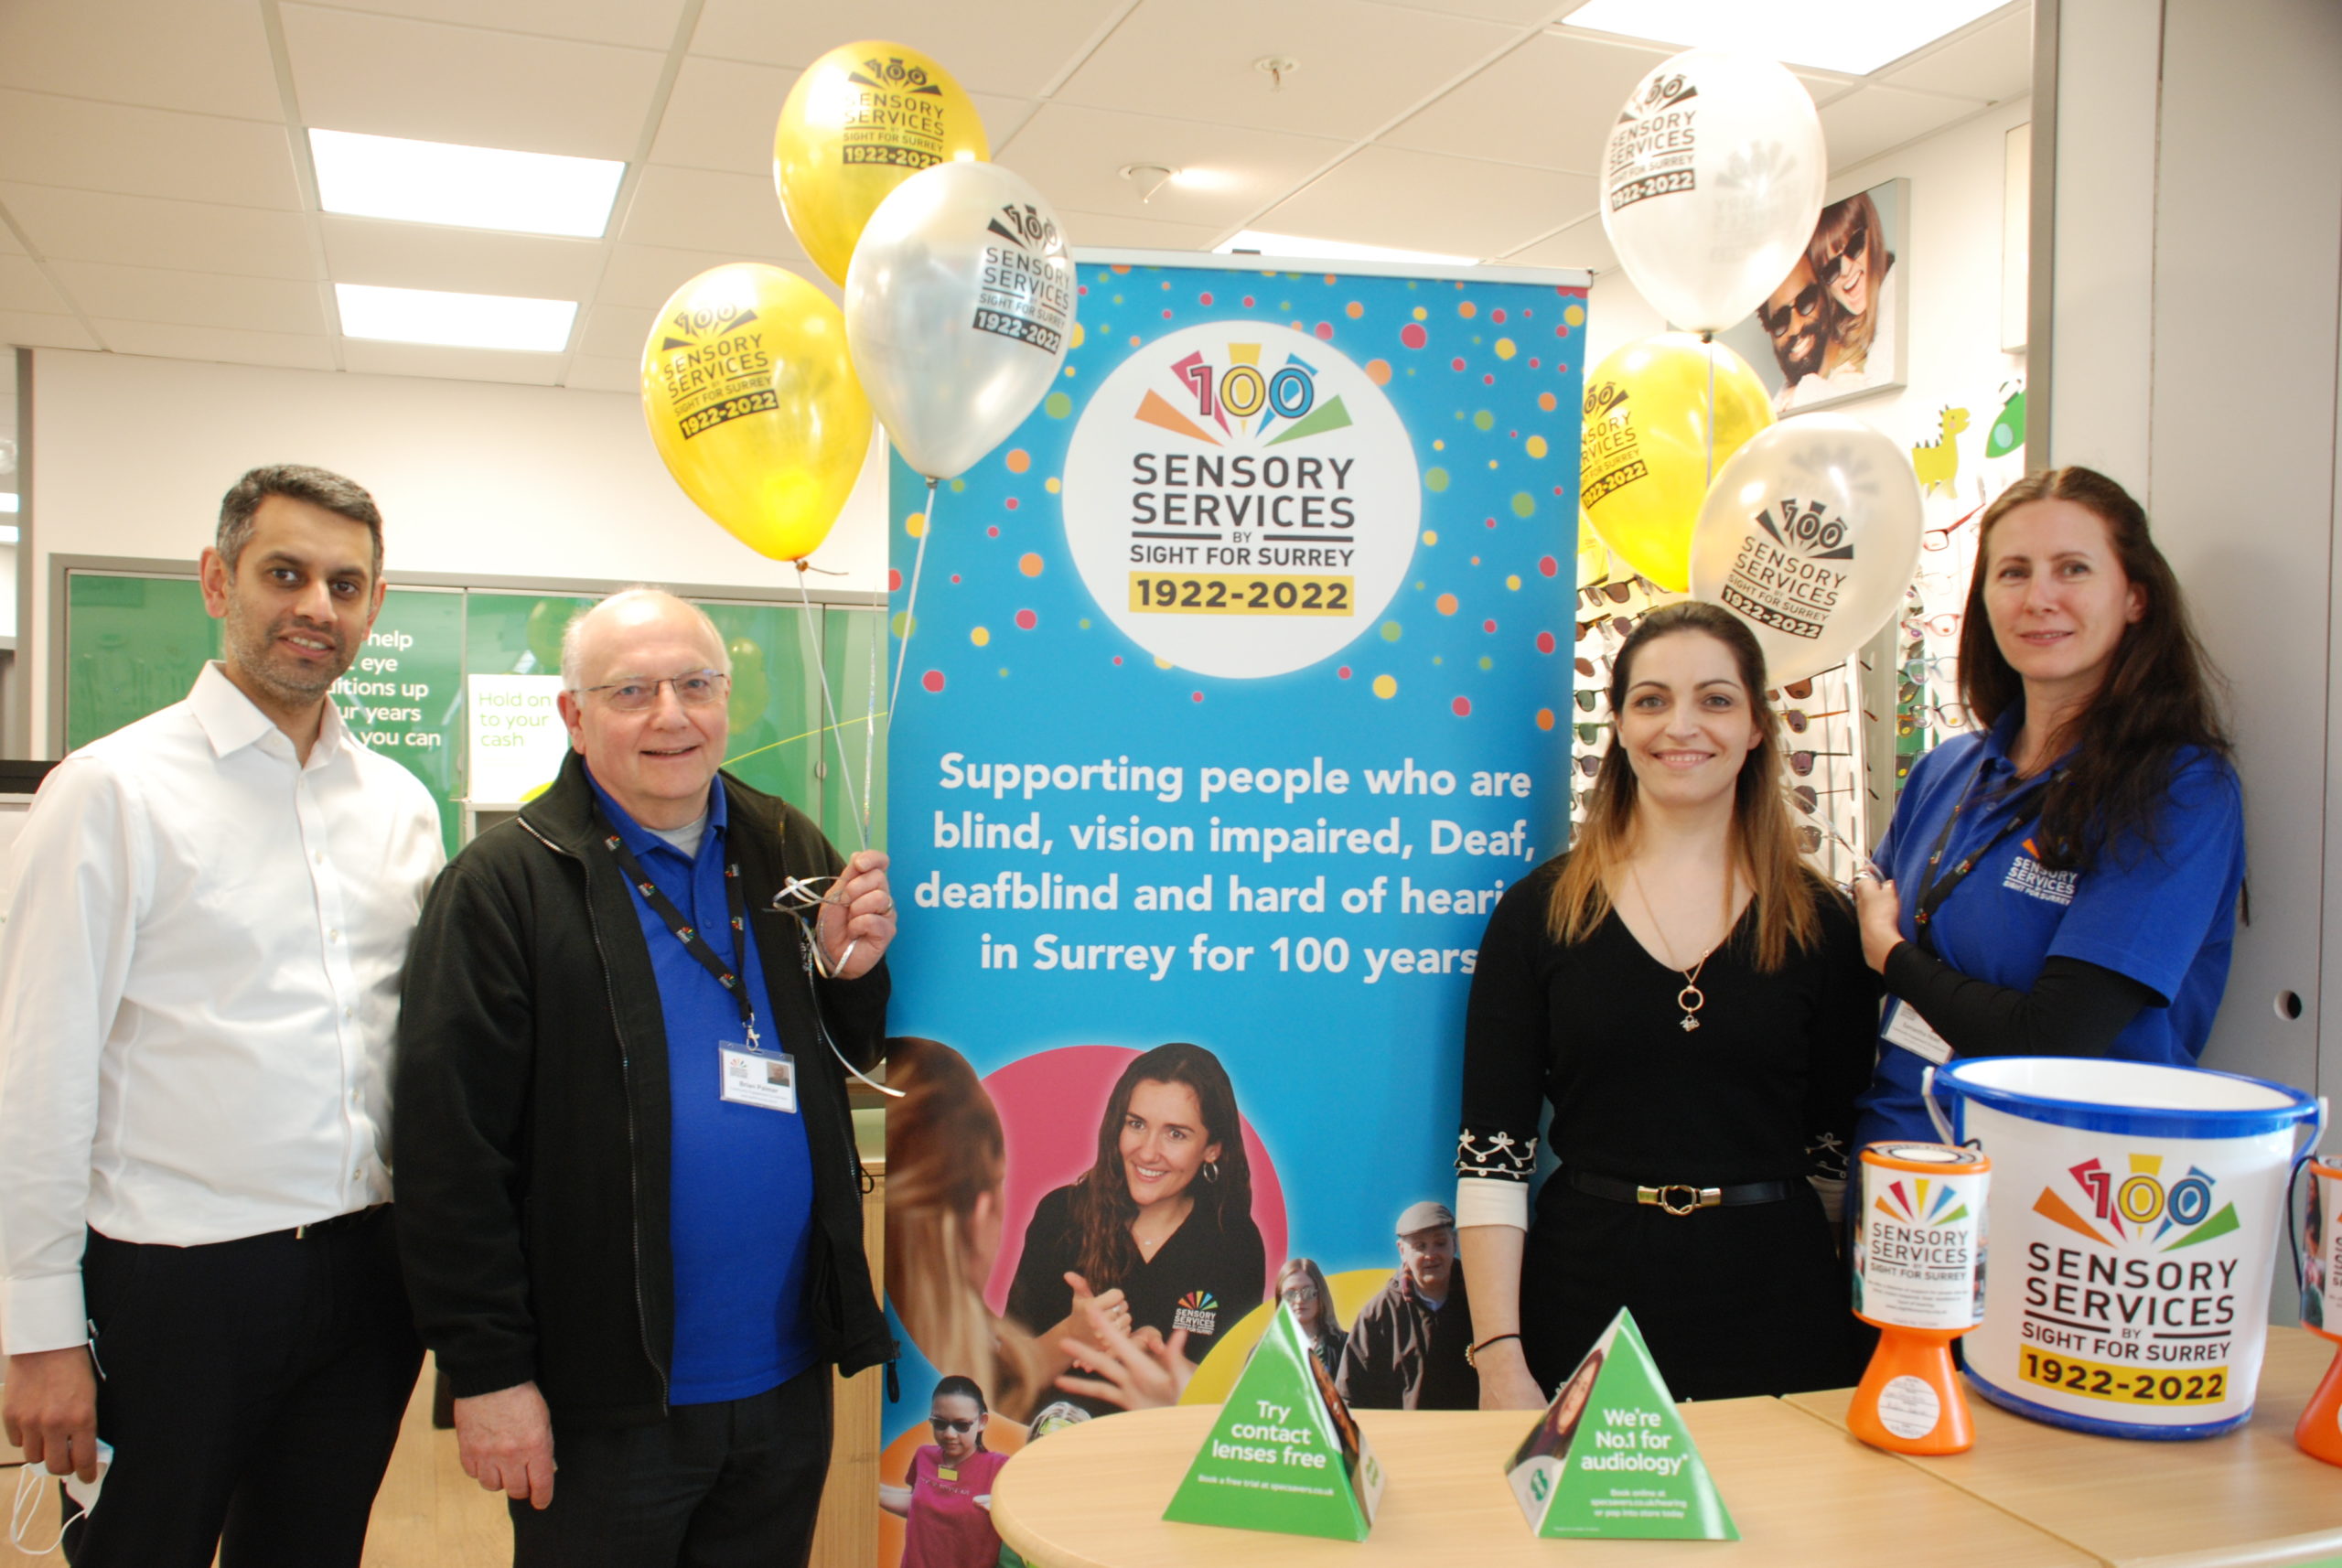 Amit and Mihaela from Specsavers Kiln Lane with Brian and Samantha from Sight for Surrey in Specsavers store fundraising.